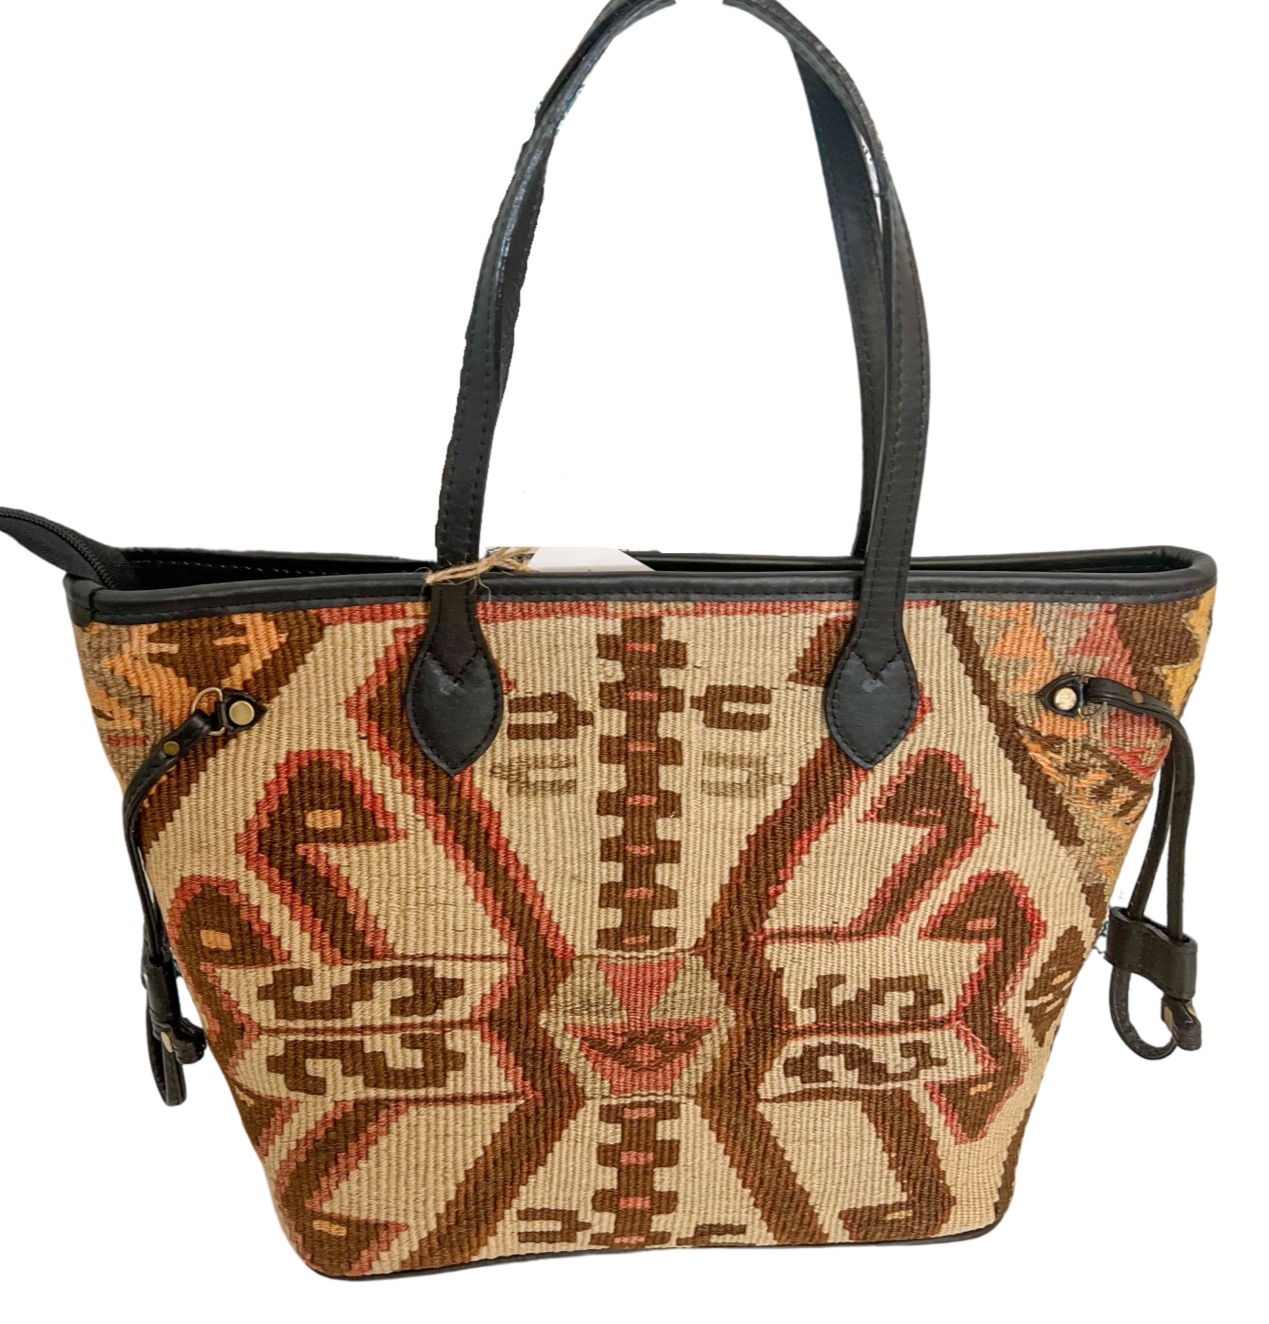 Woven Indian Silk and Leather Tote Bag | Handmade leather tote bag, Kilim  tote bag, Handwoven bag